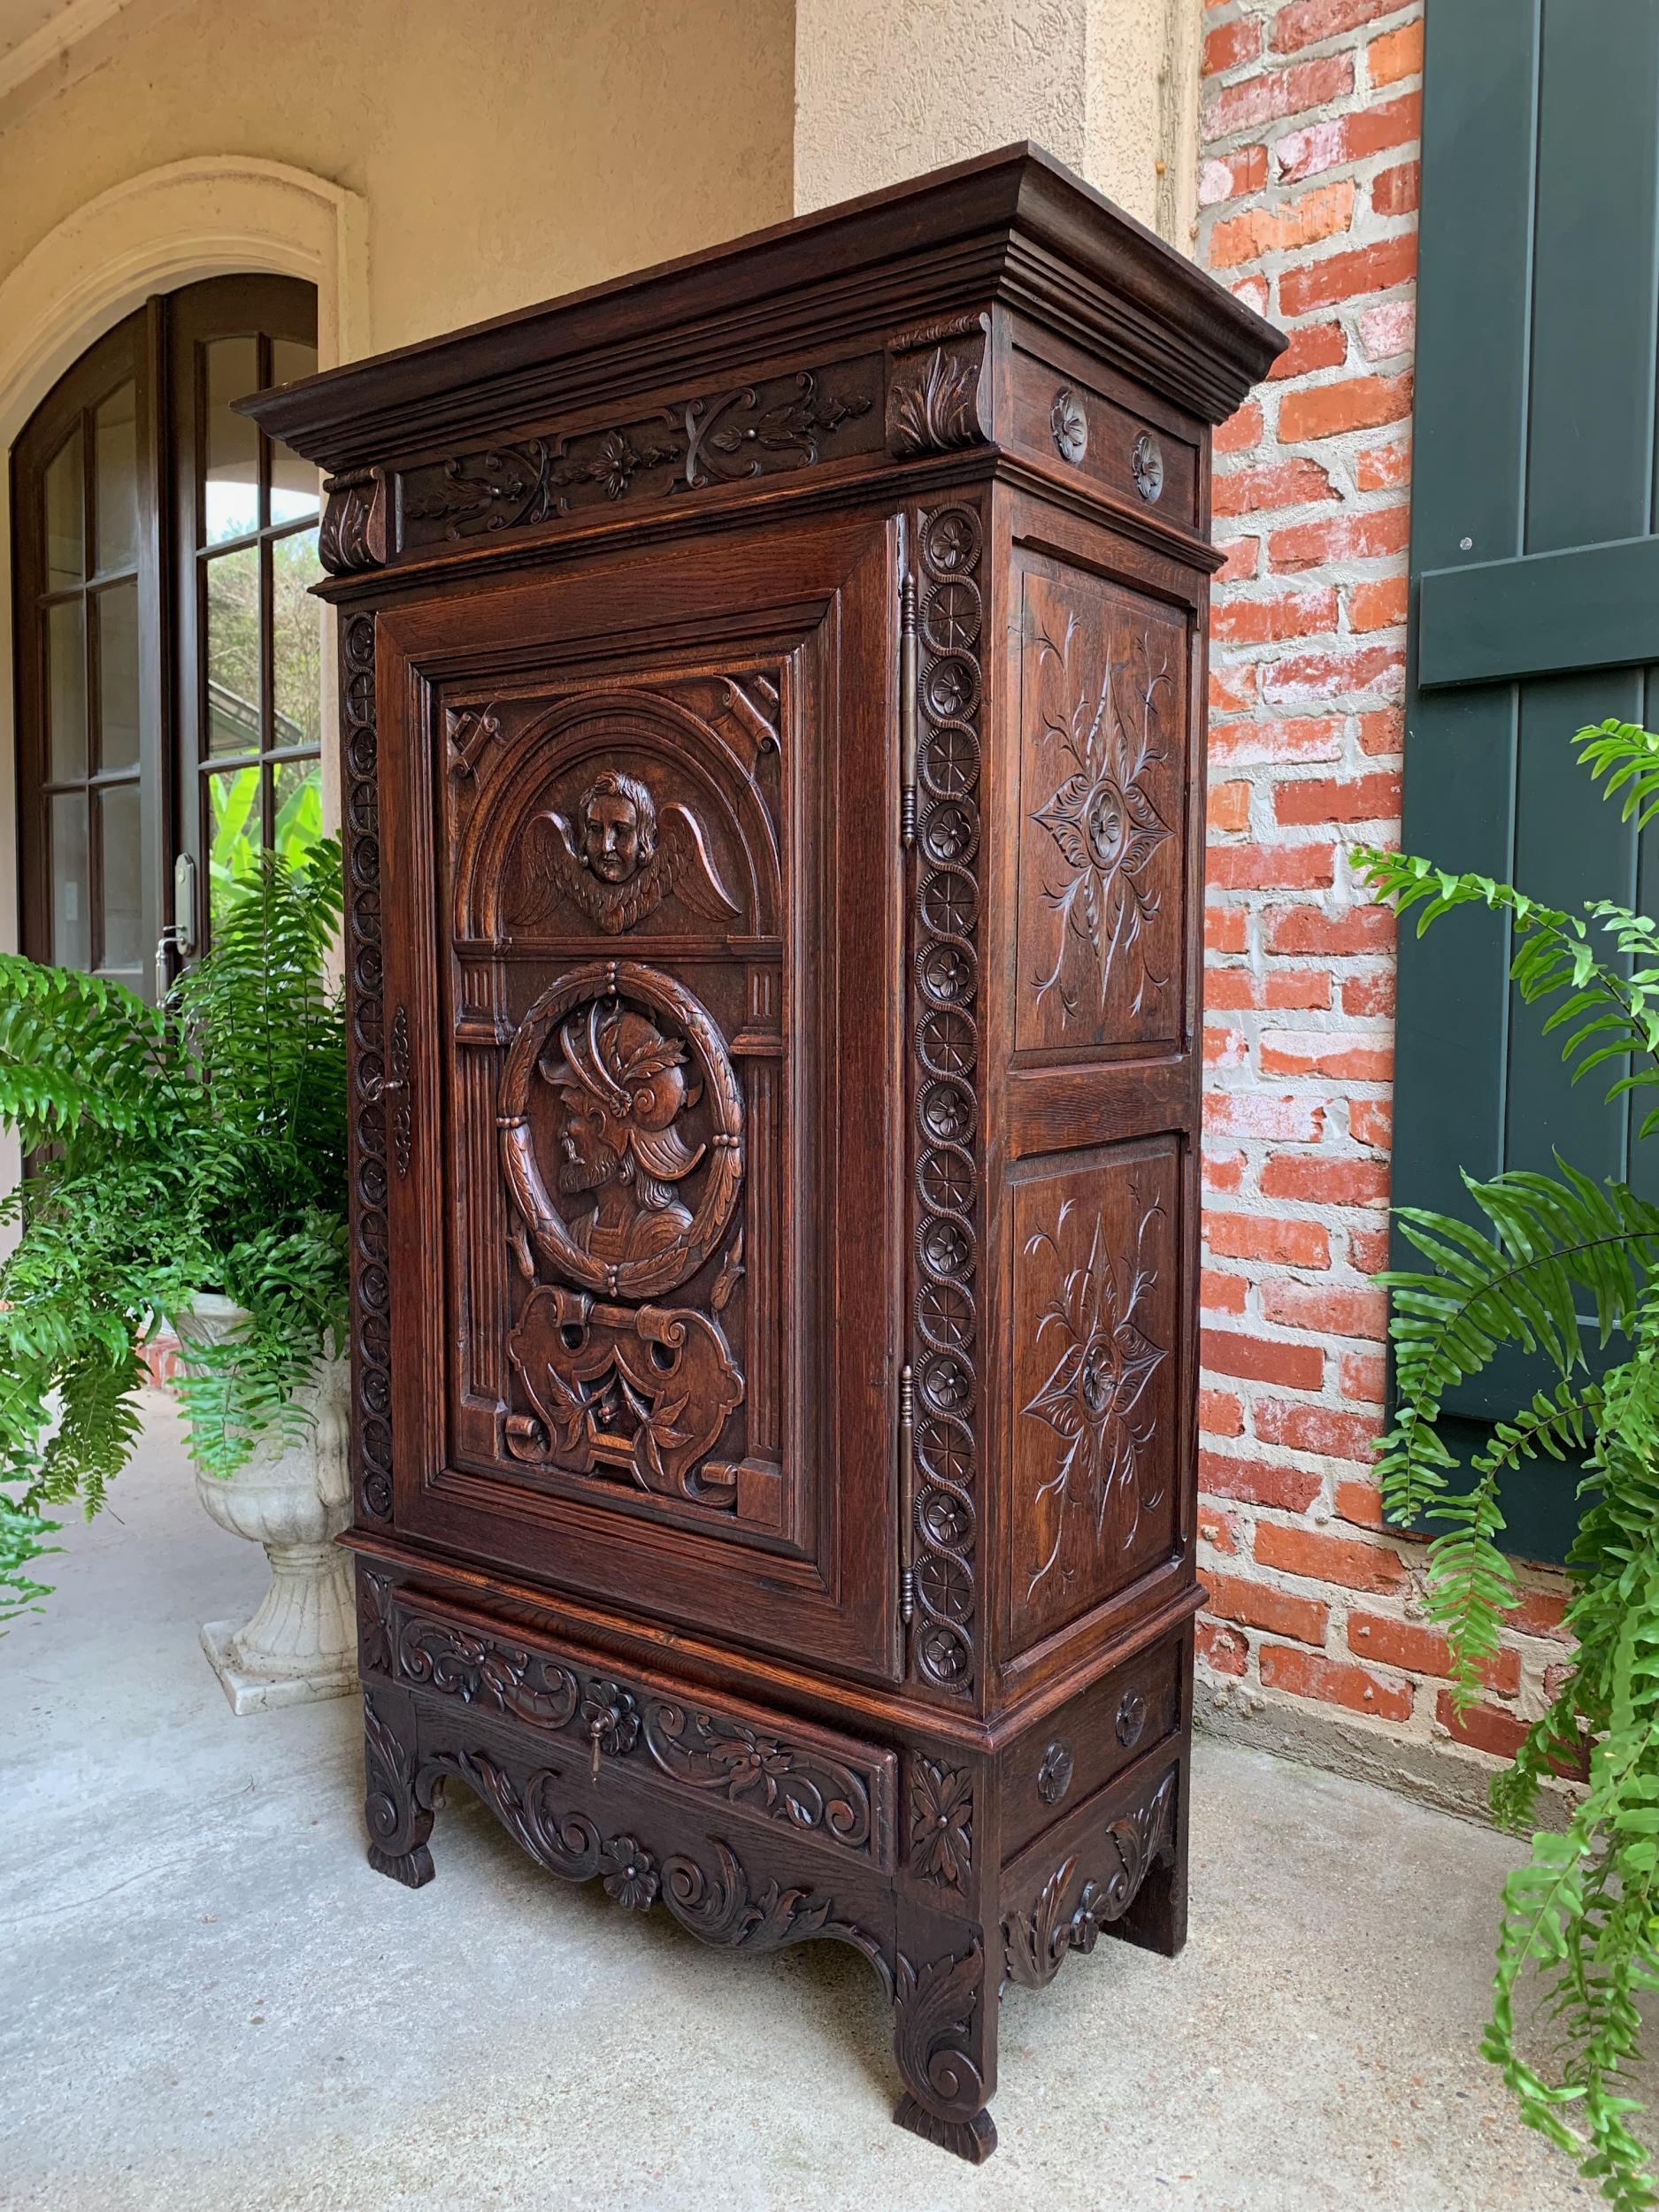 19th century French Carved Oak Storage Cabinet Renaissance Roman Centurion  In Good Condition For Sale In Shreveport, LA